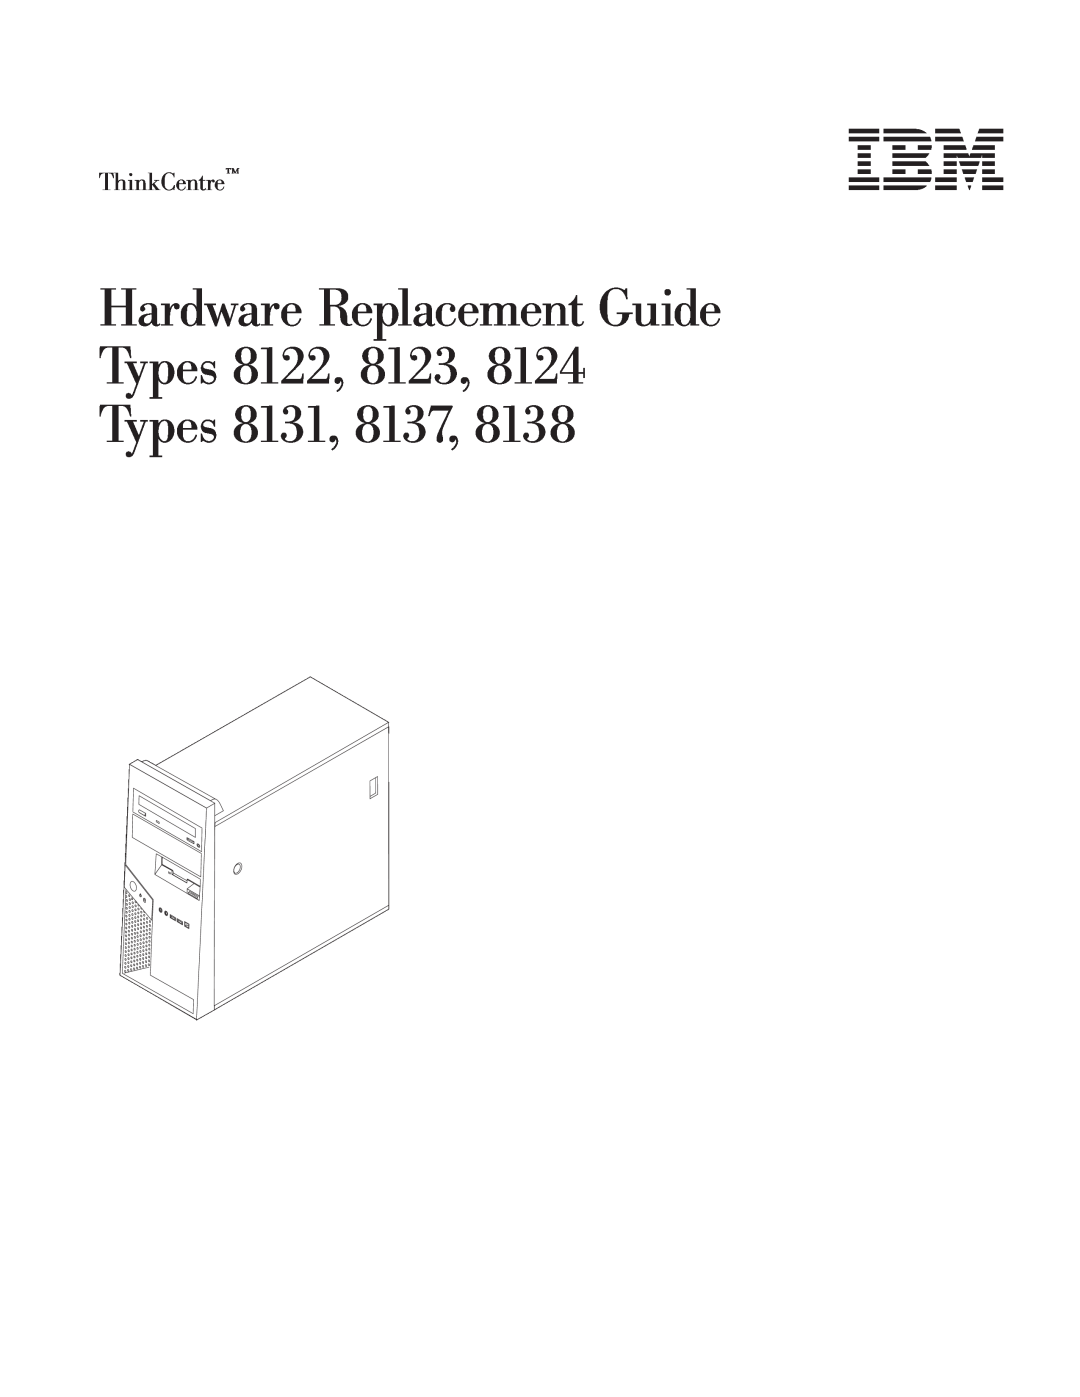 IBM 8131, 8138, 8137, 8124 manual Hardware Replacement Guide Types 8122, 8123 Types, ThinkCentre 